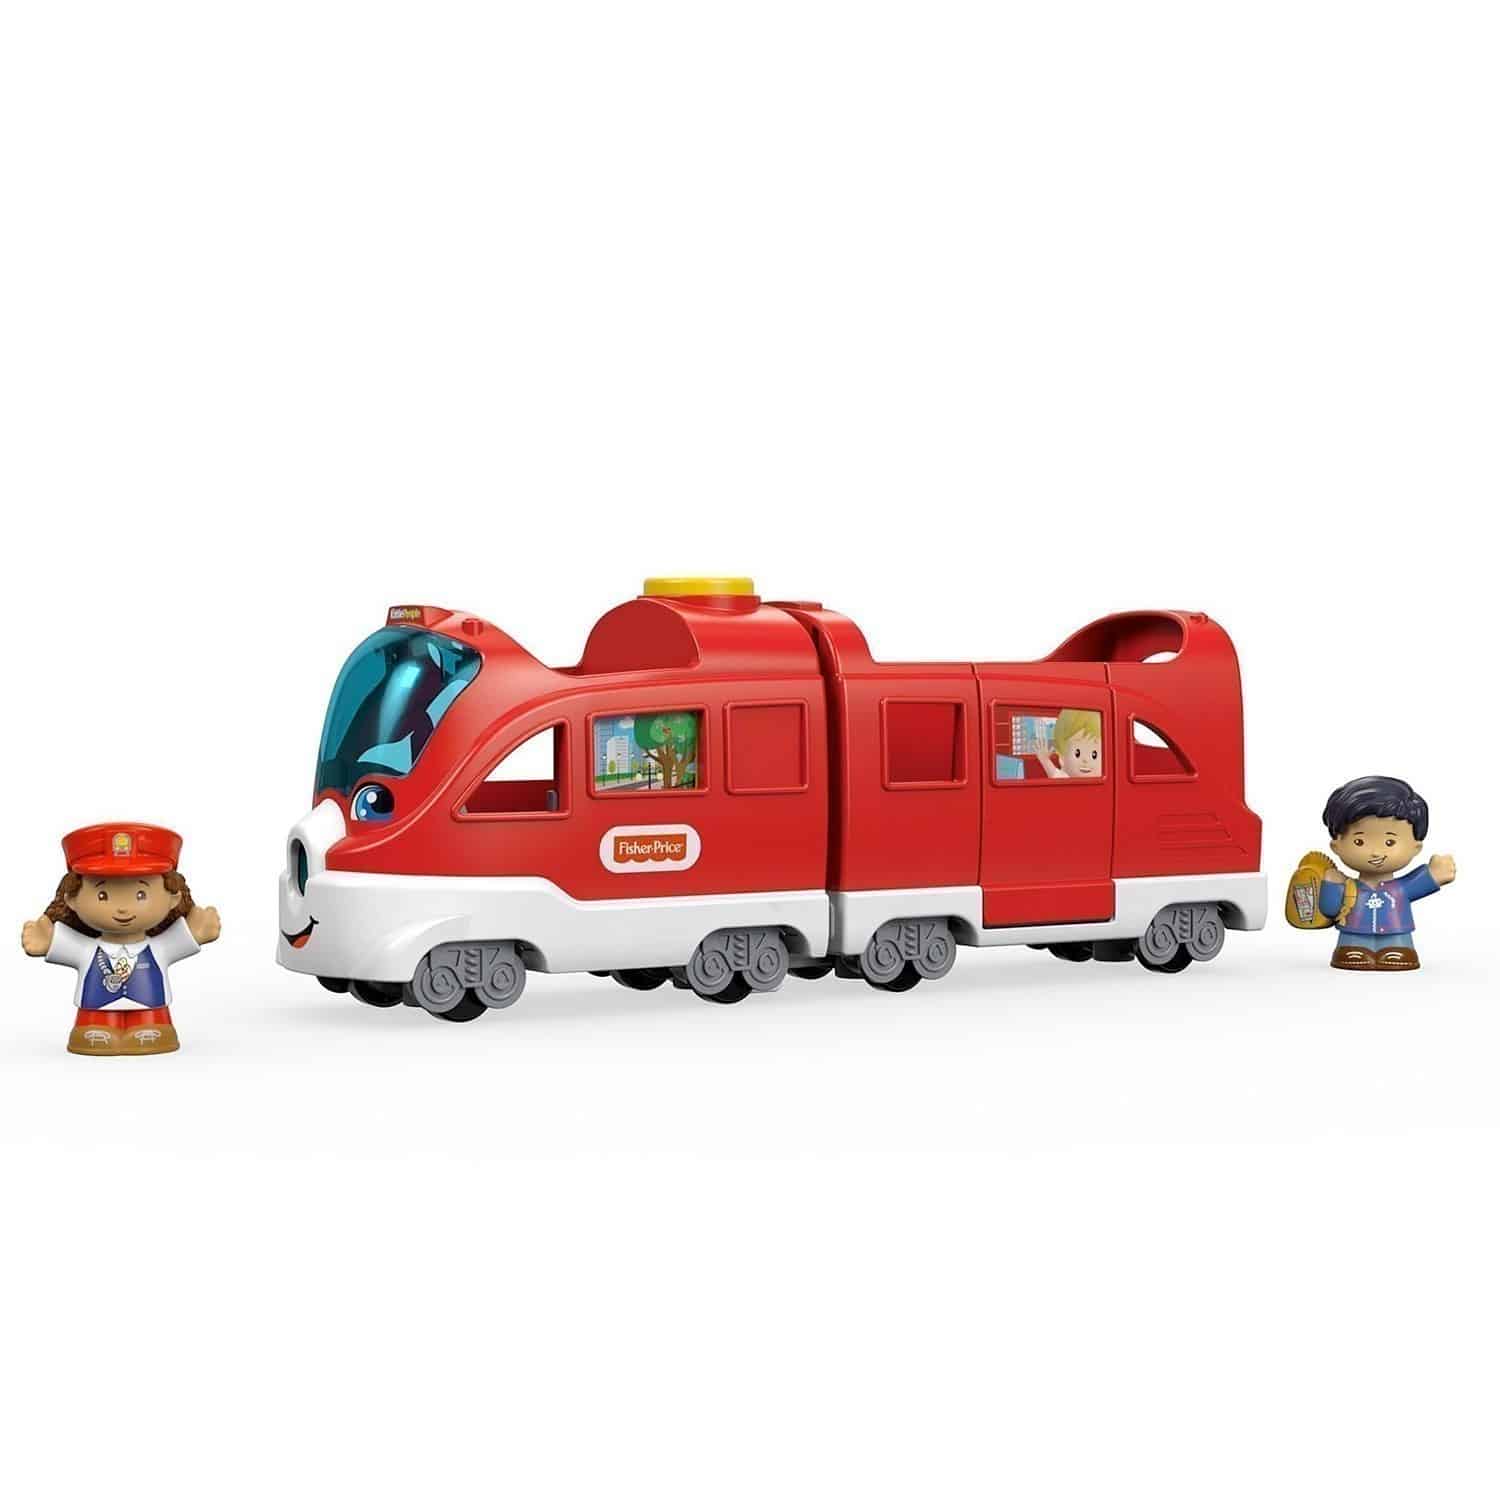 Fisher Price - Little People - Friendly Passengers Train